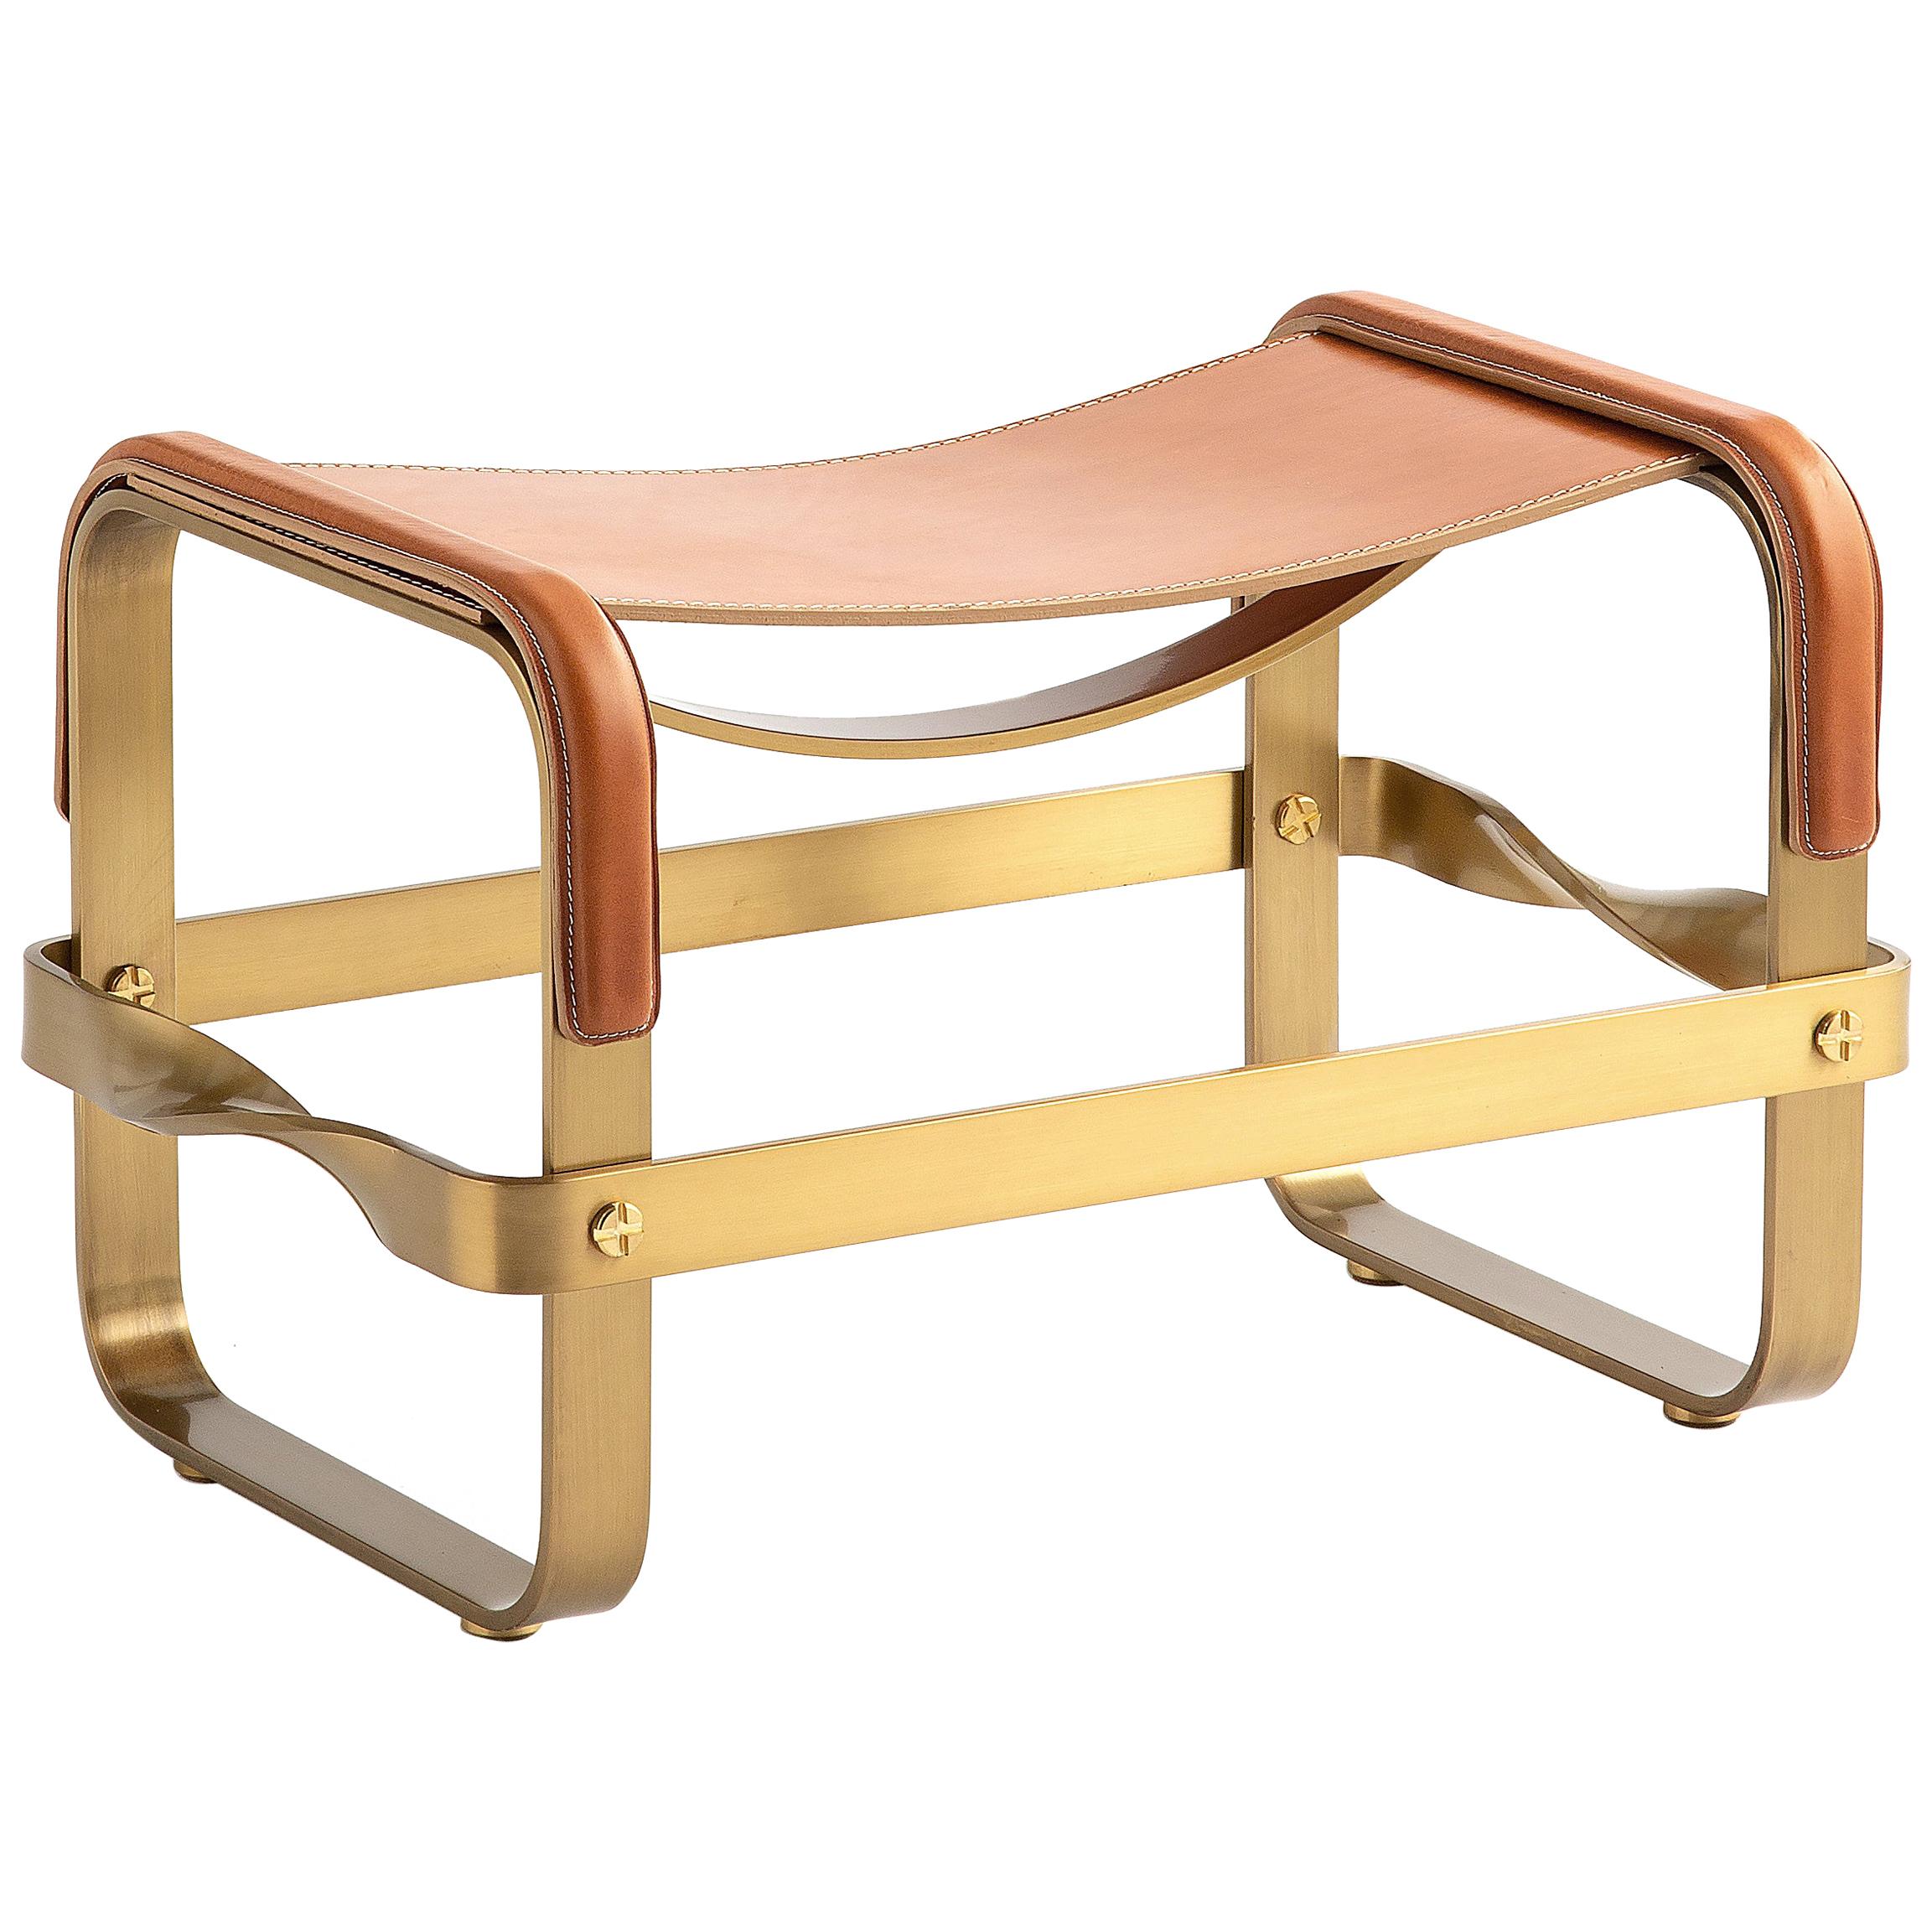 Footstool Aged Brass Steel and Natural Leather, Contemporary Style